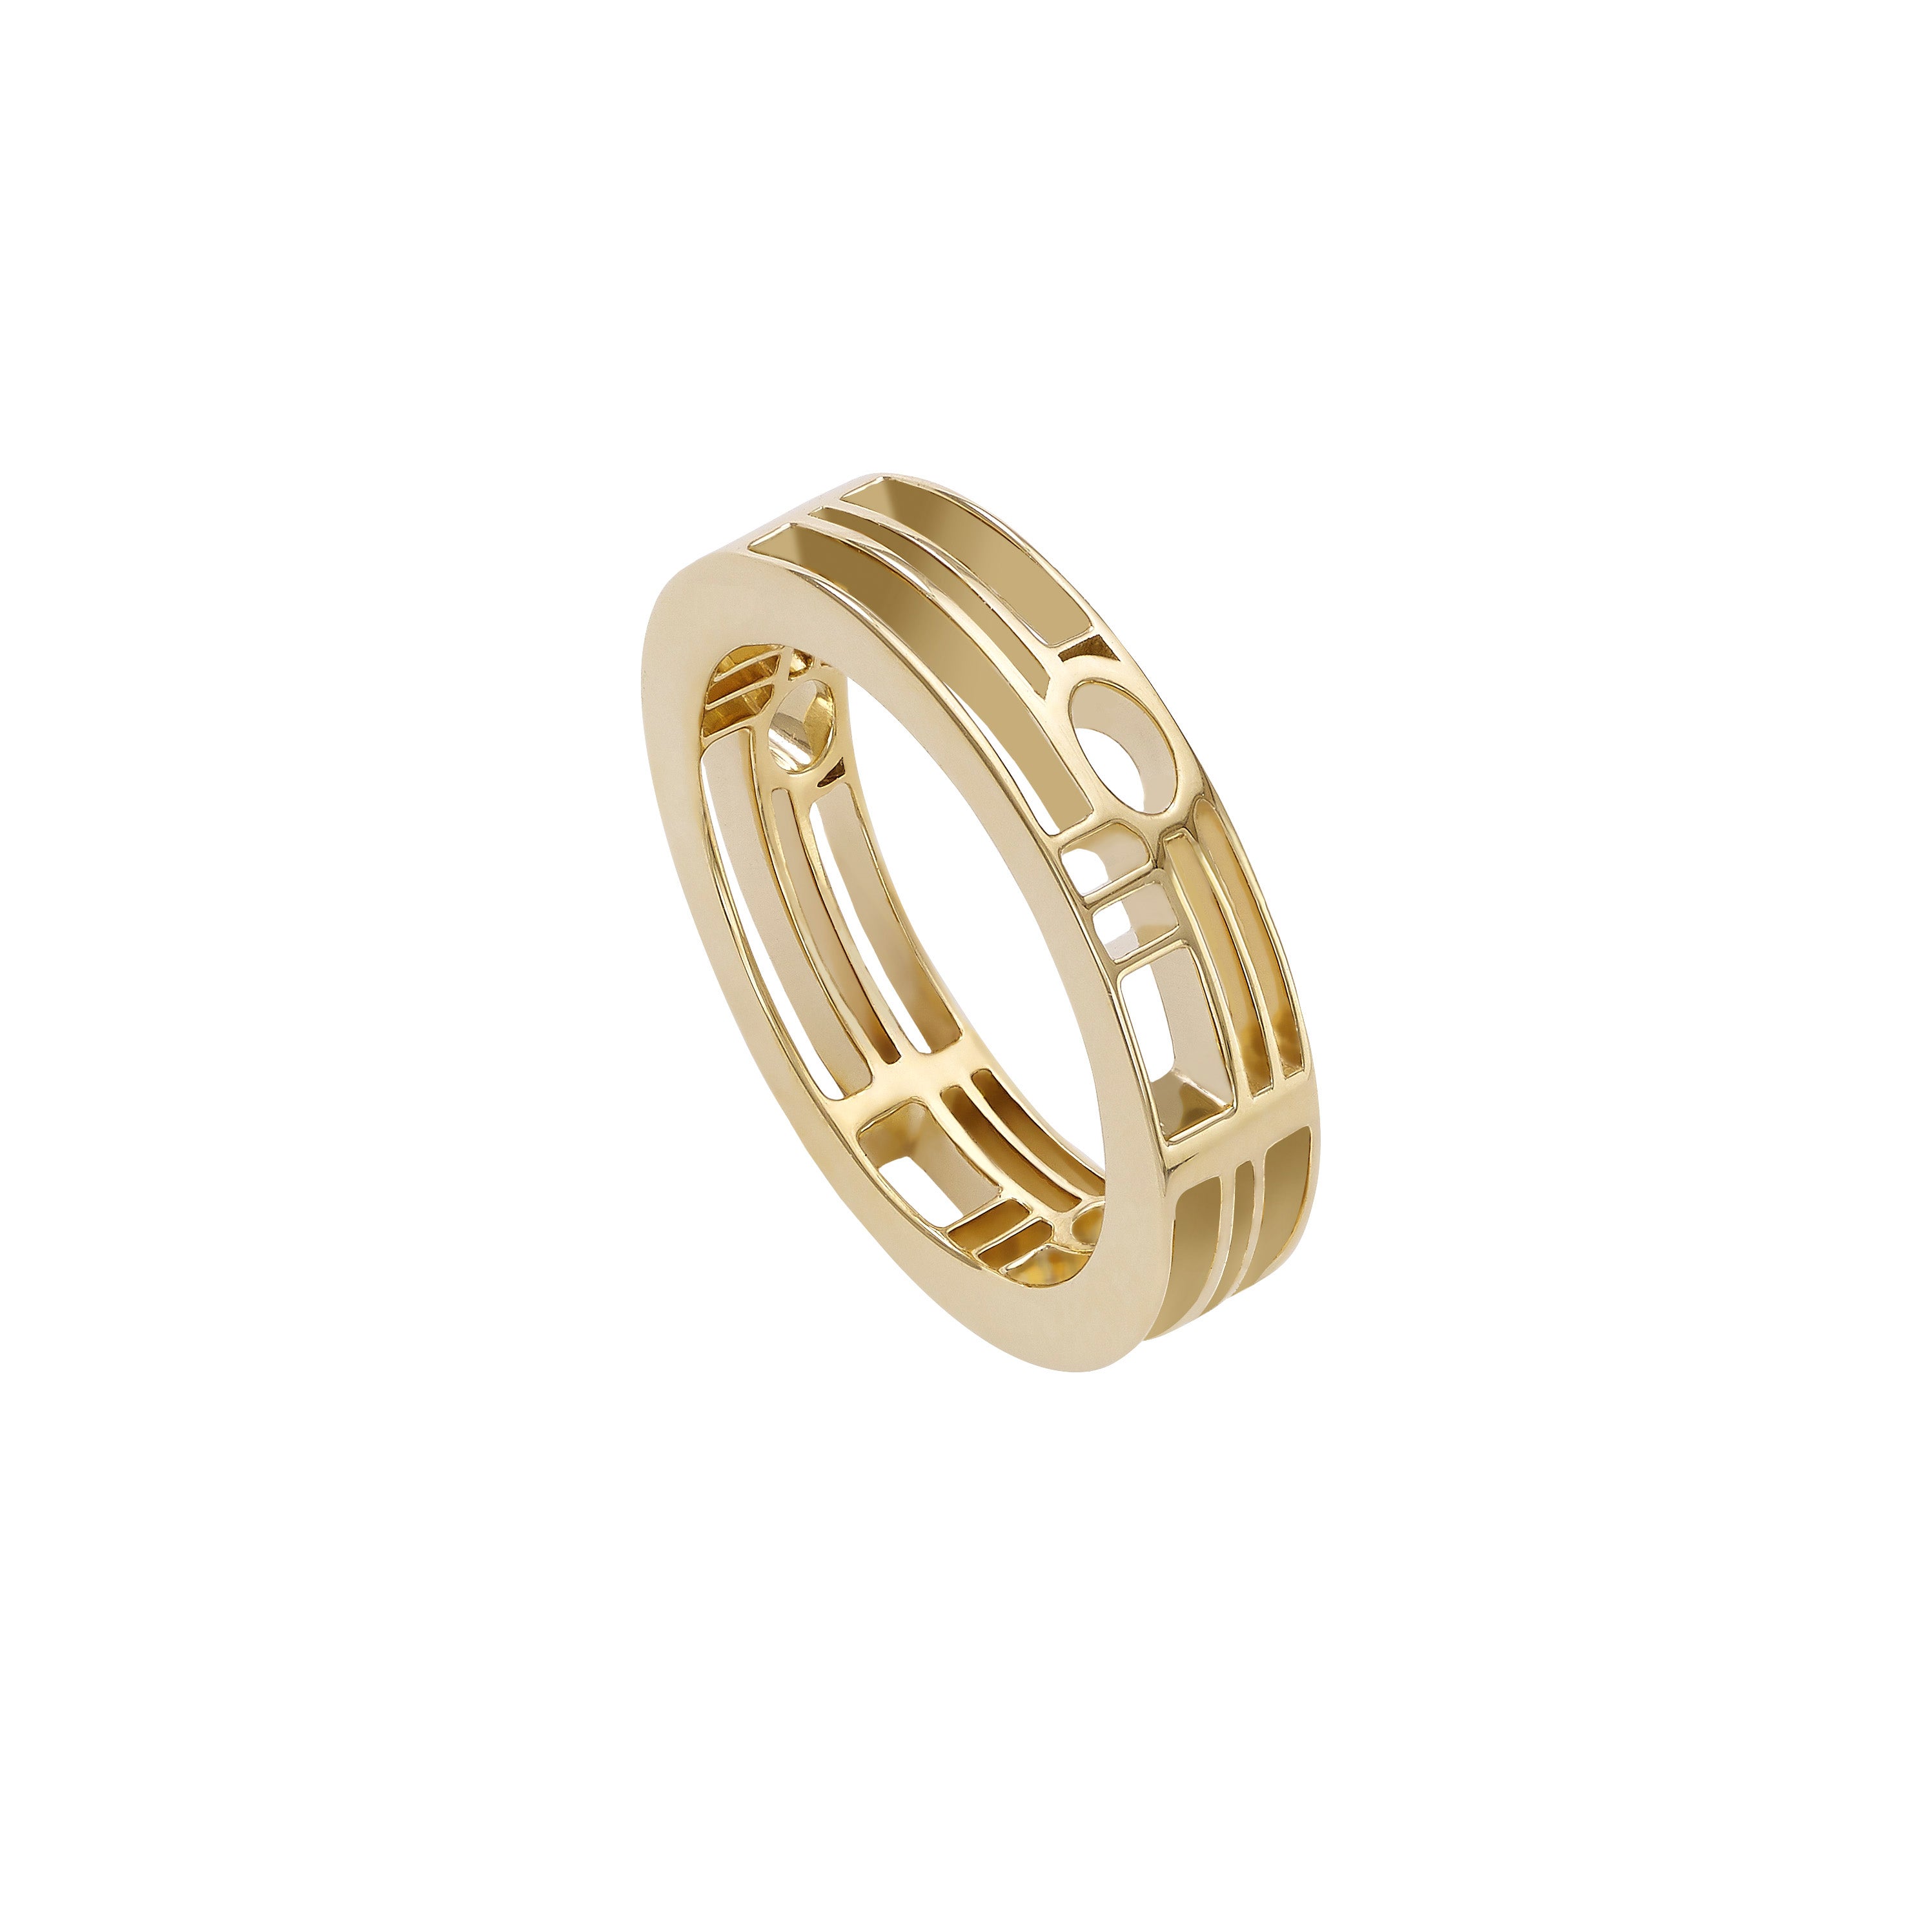 Perspective Ring - Yellow Gold